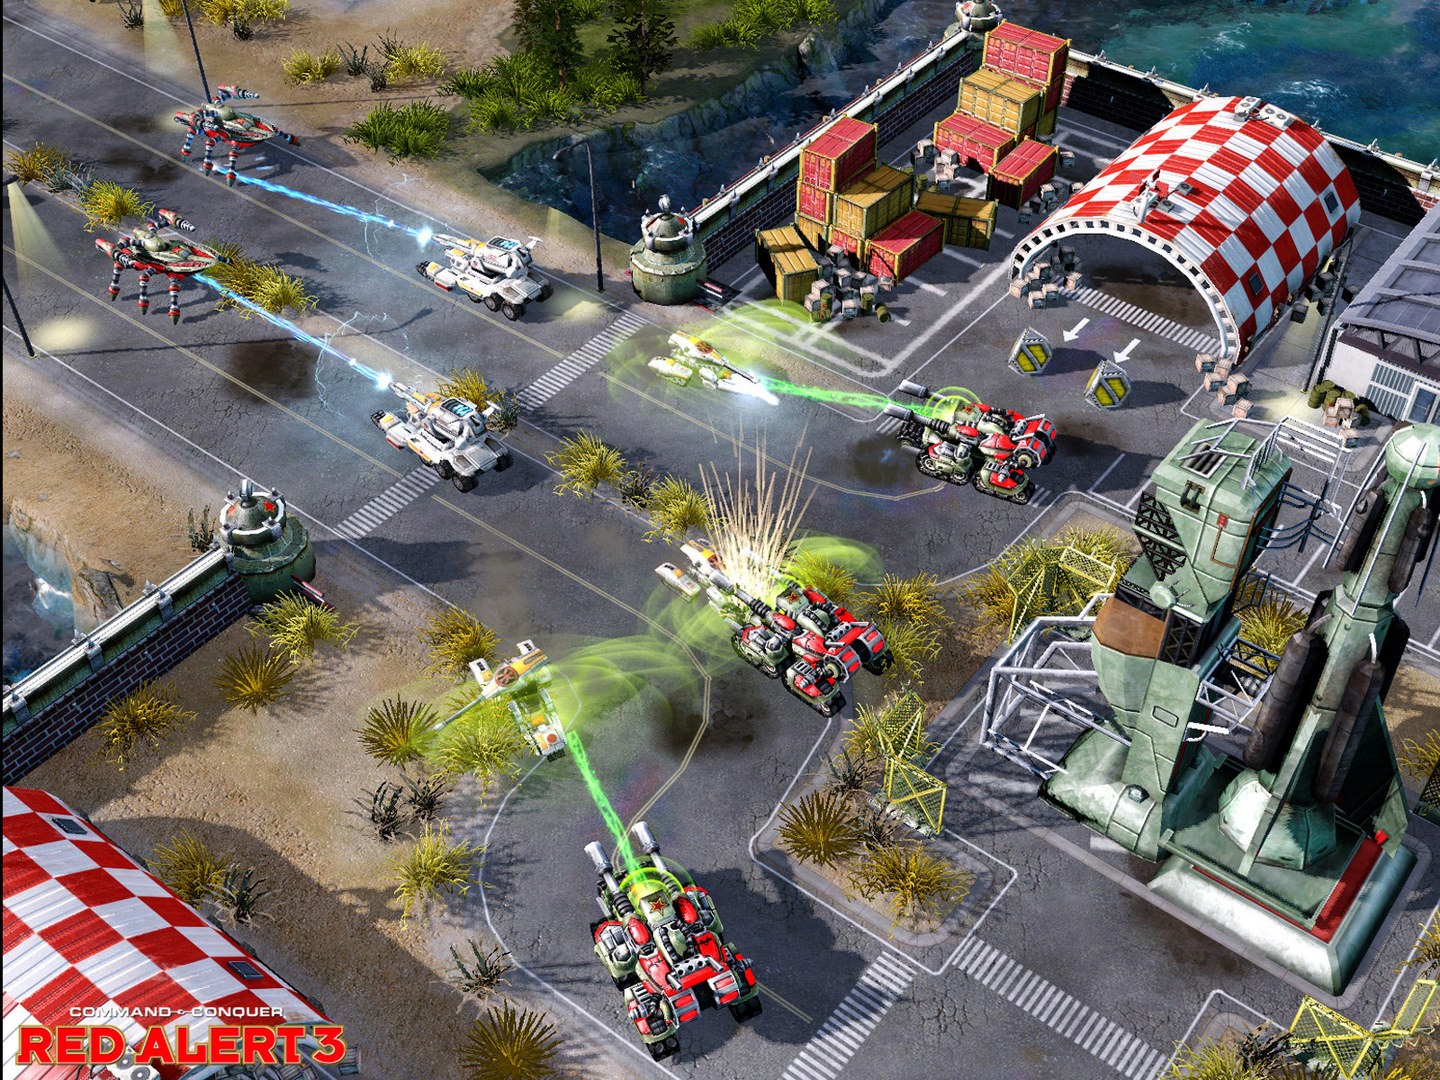 benzin bypass flov Save 75% on Command & Conquer: Red Alert 3 on Steam